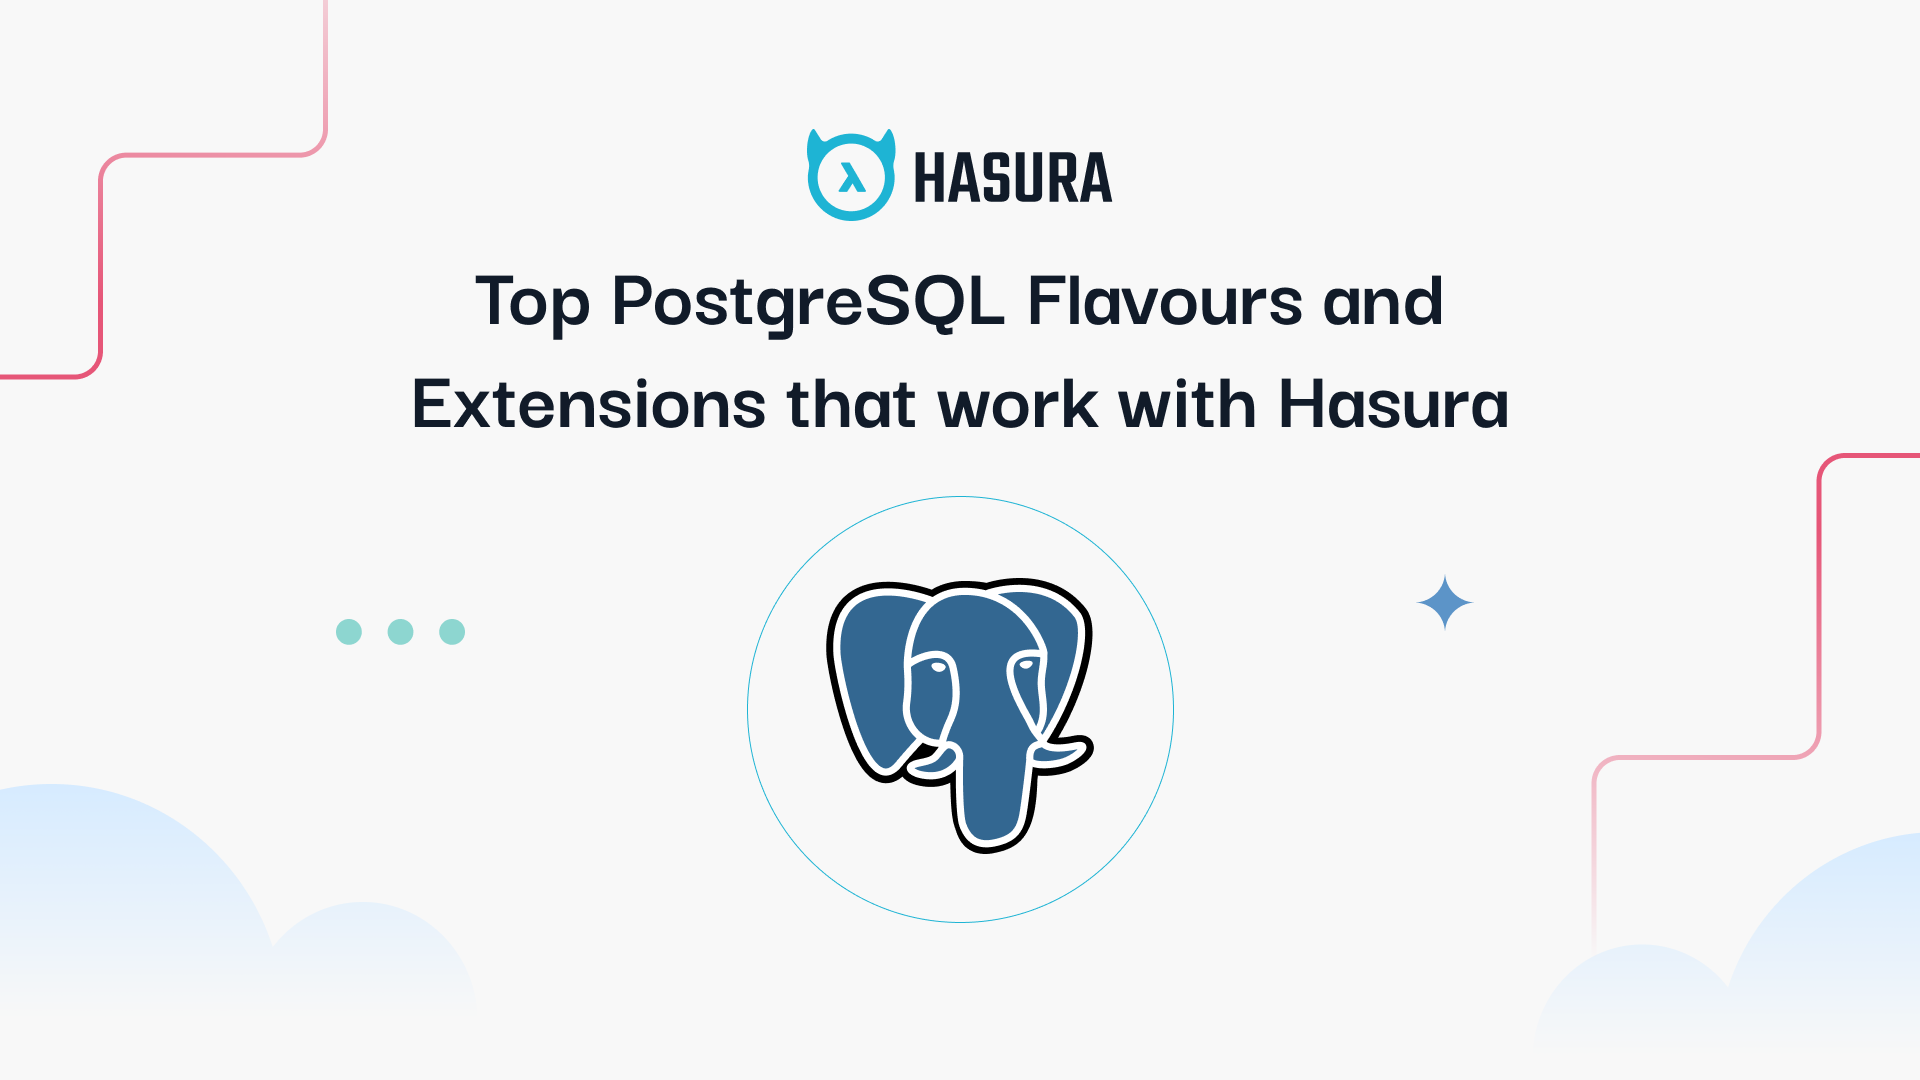 PostgreSQL Flavours and Extensions